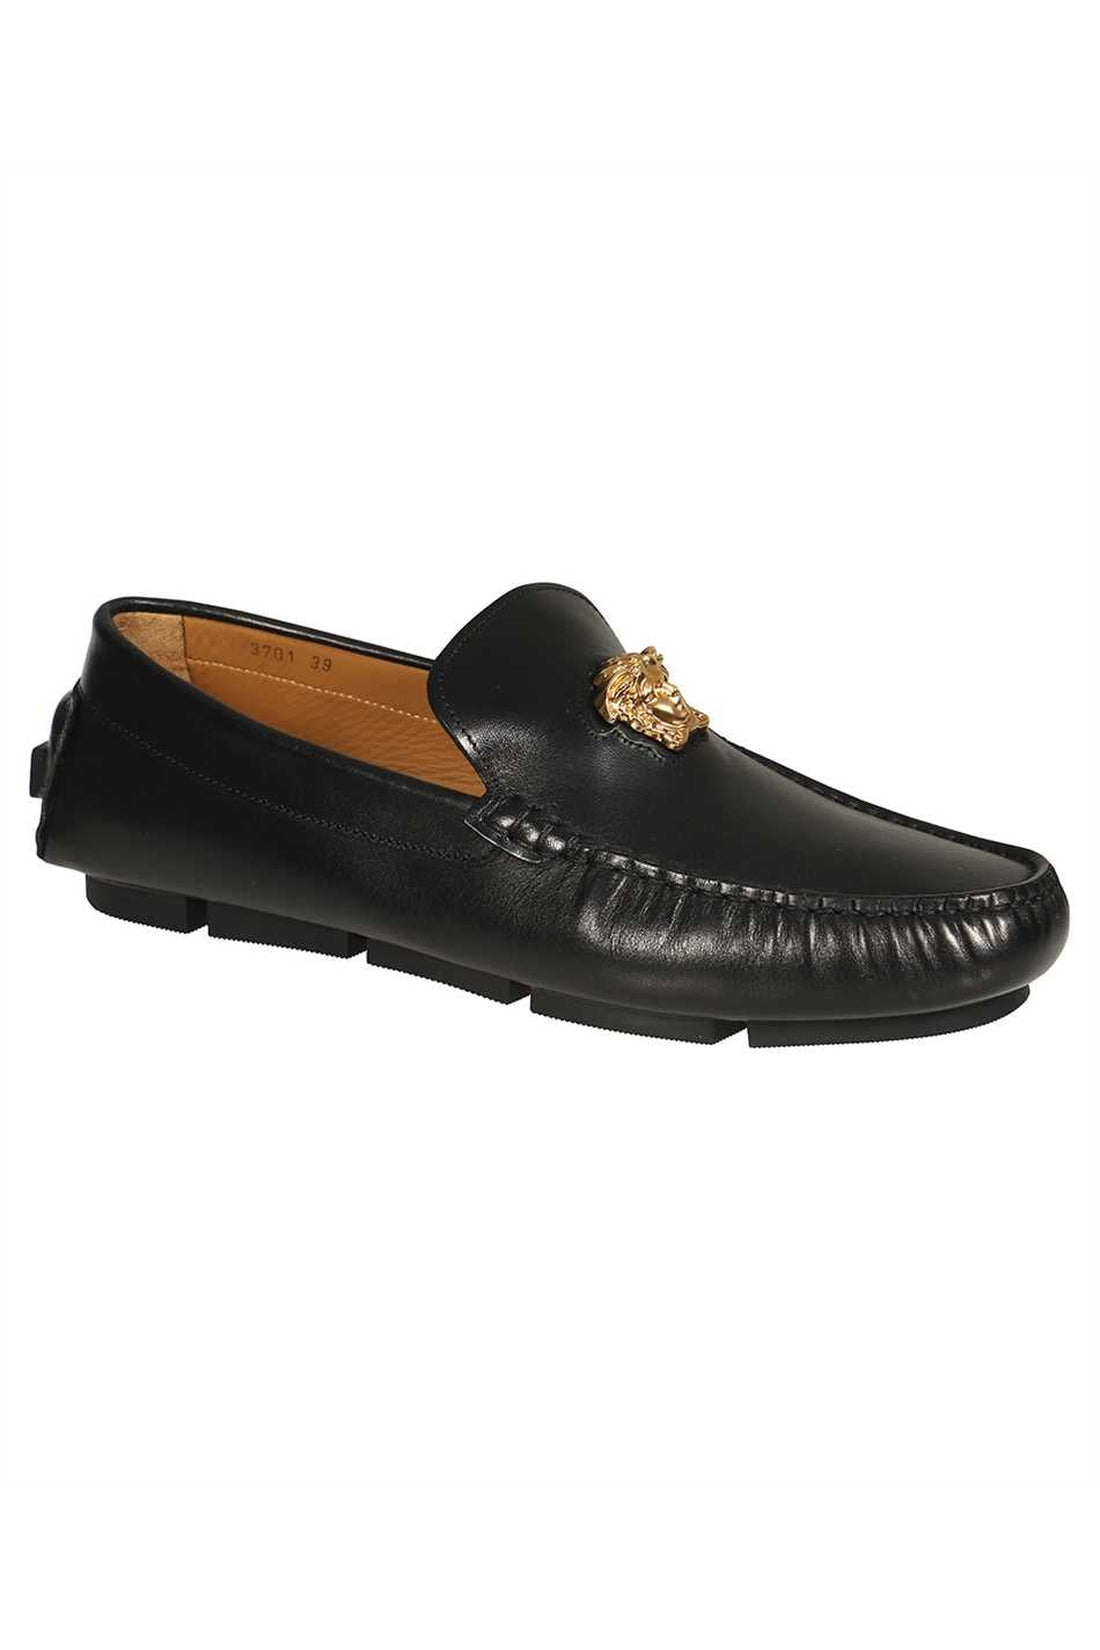 Versace-OUTLET-SALE-Driver leather loafers-ARCHIVIST